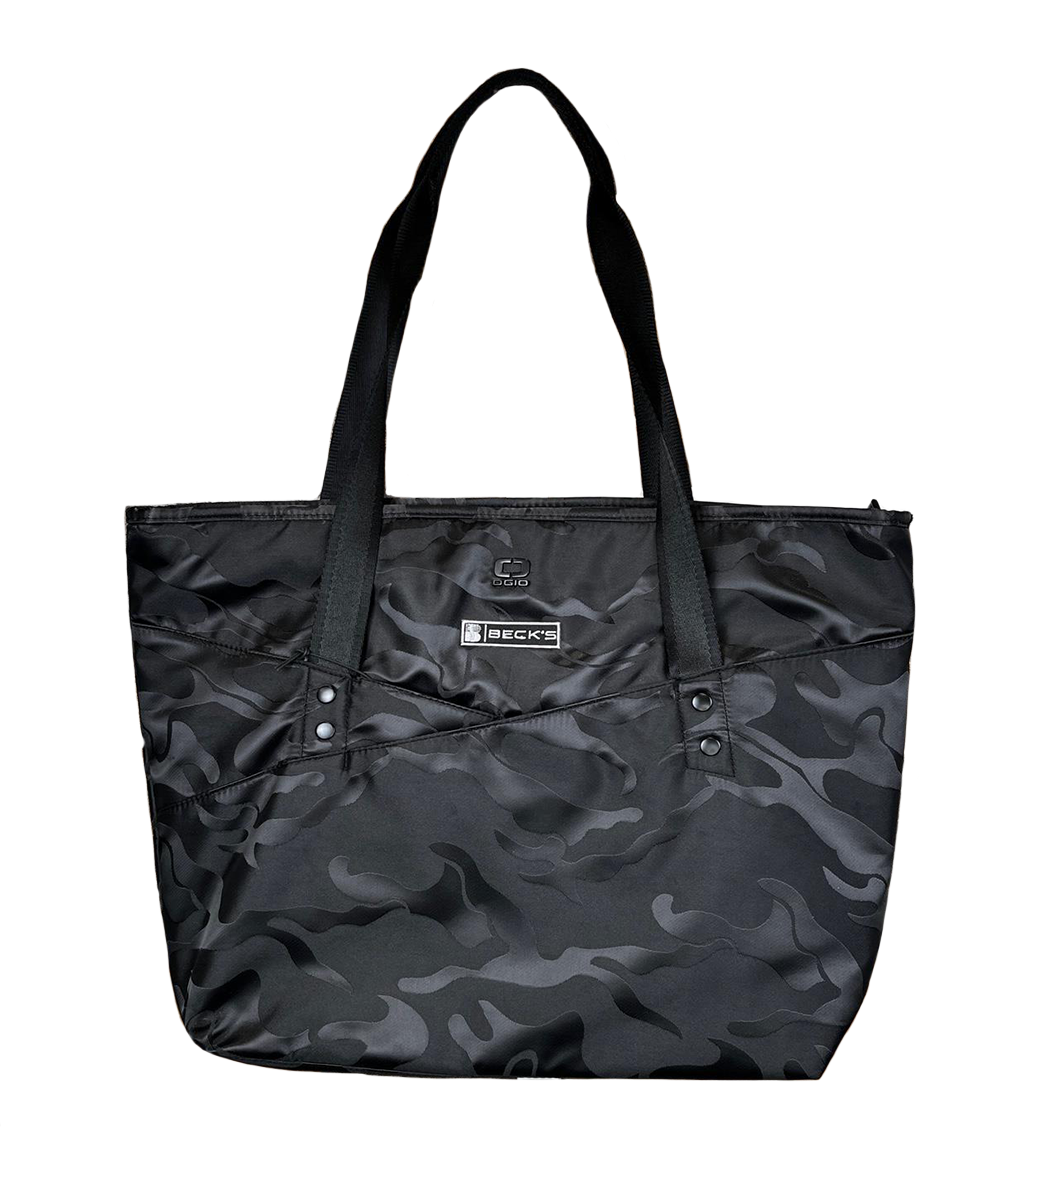 03540 Ogio Downtown Black Camo Tote - Beck's Country Store